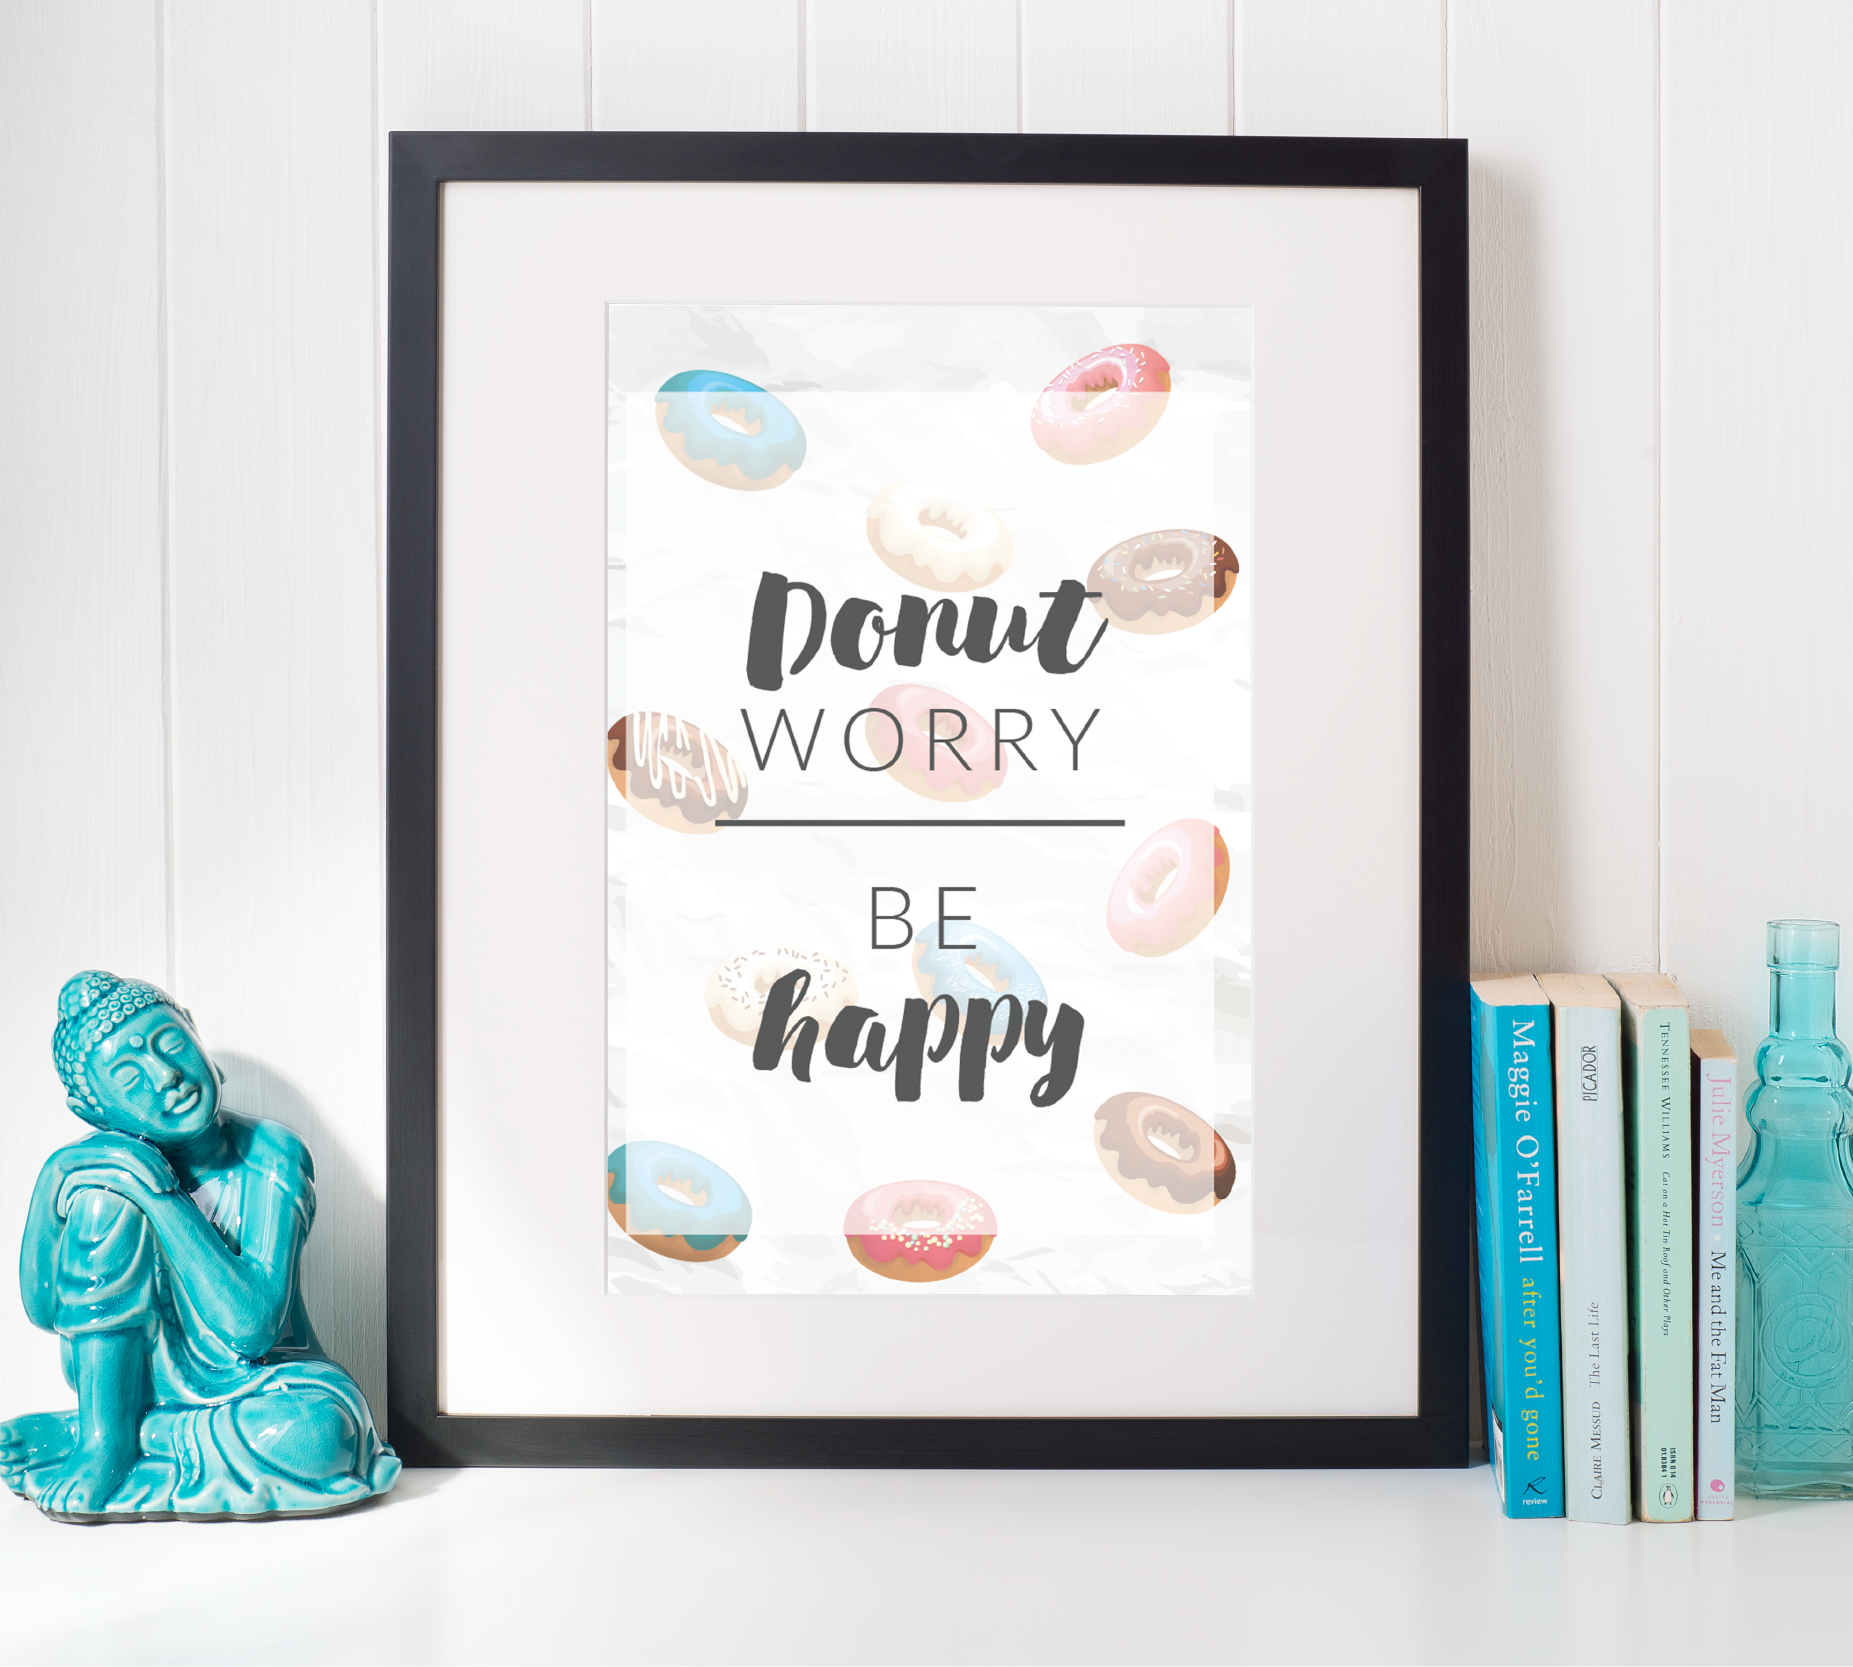 Free Printable Donut Worry Be Happy from @pinkimonogirl for a gallery wall